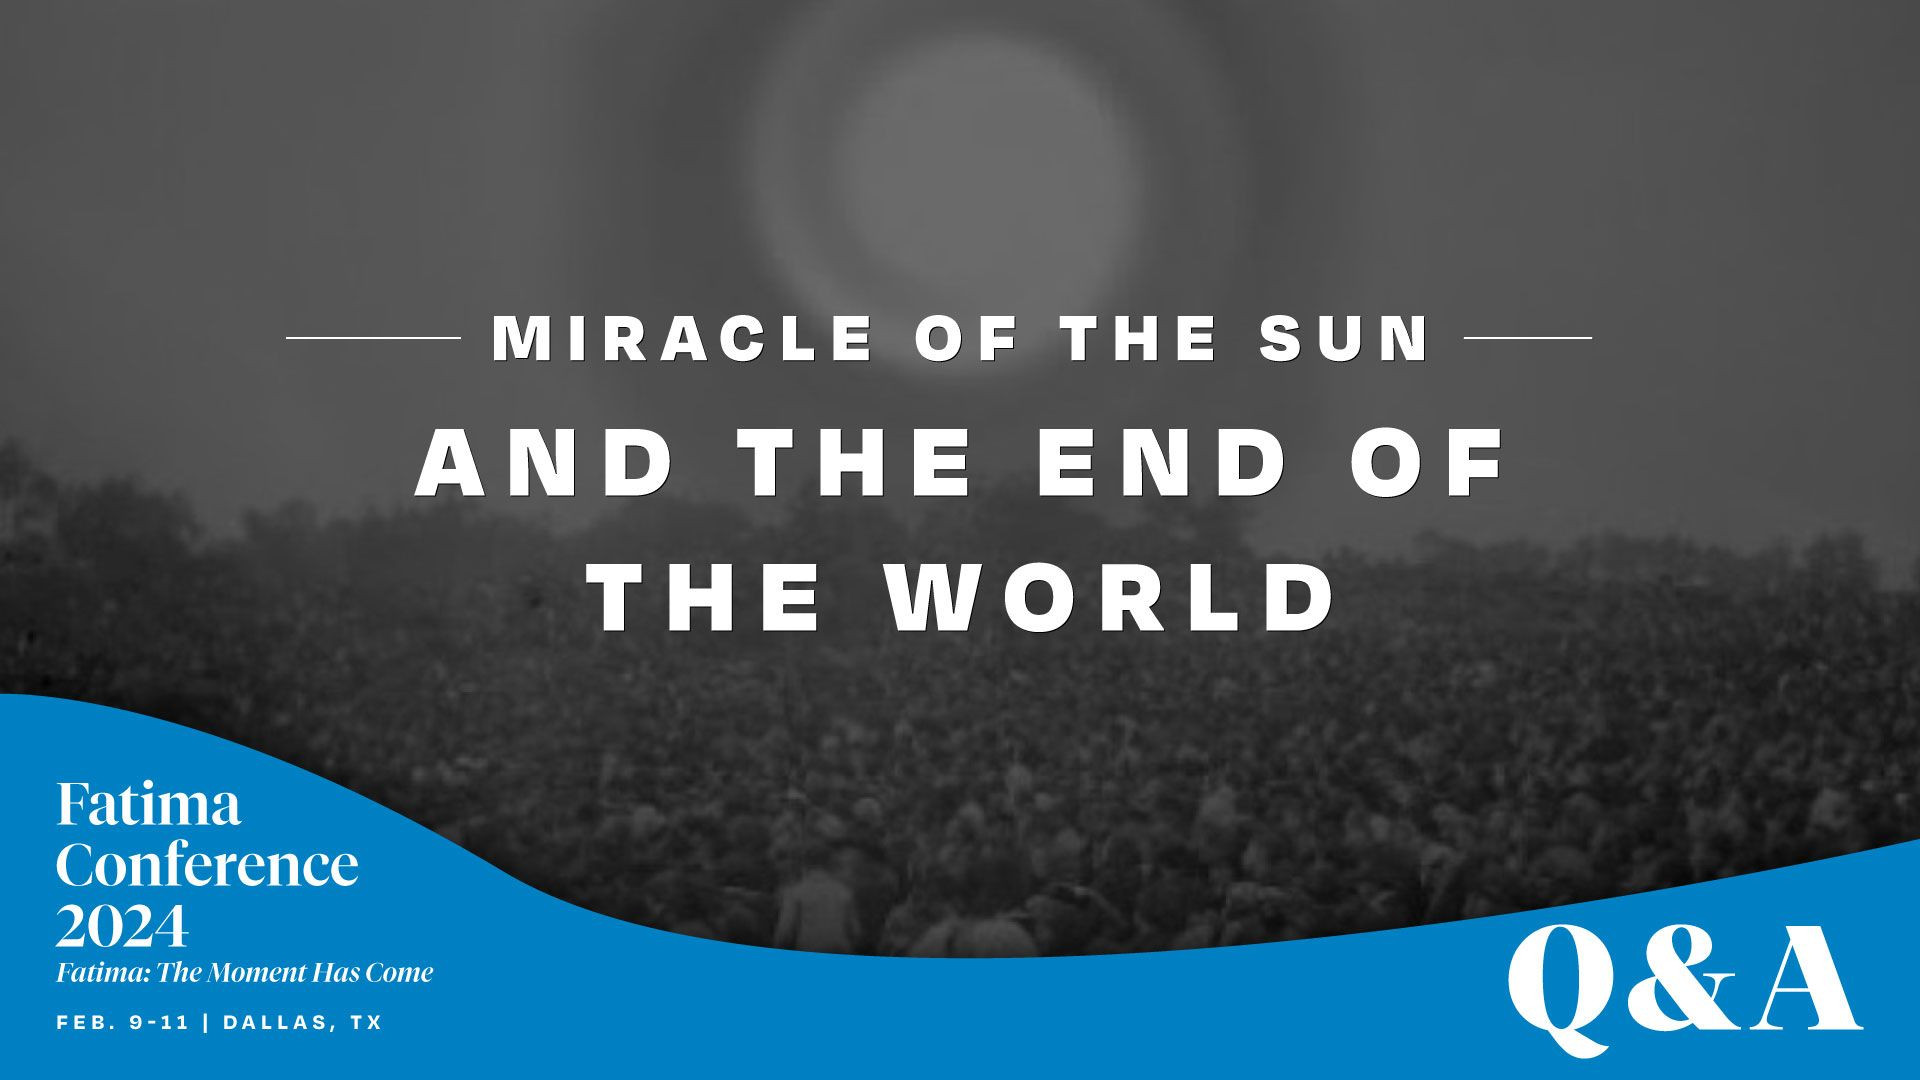 The Miracle of the Sun parallels the End of the World